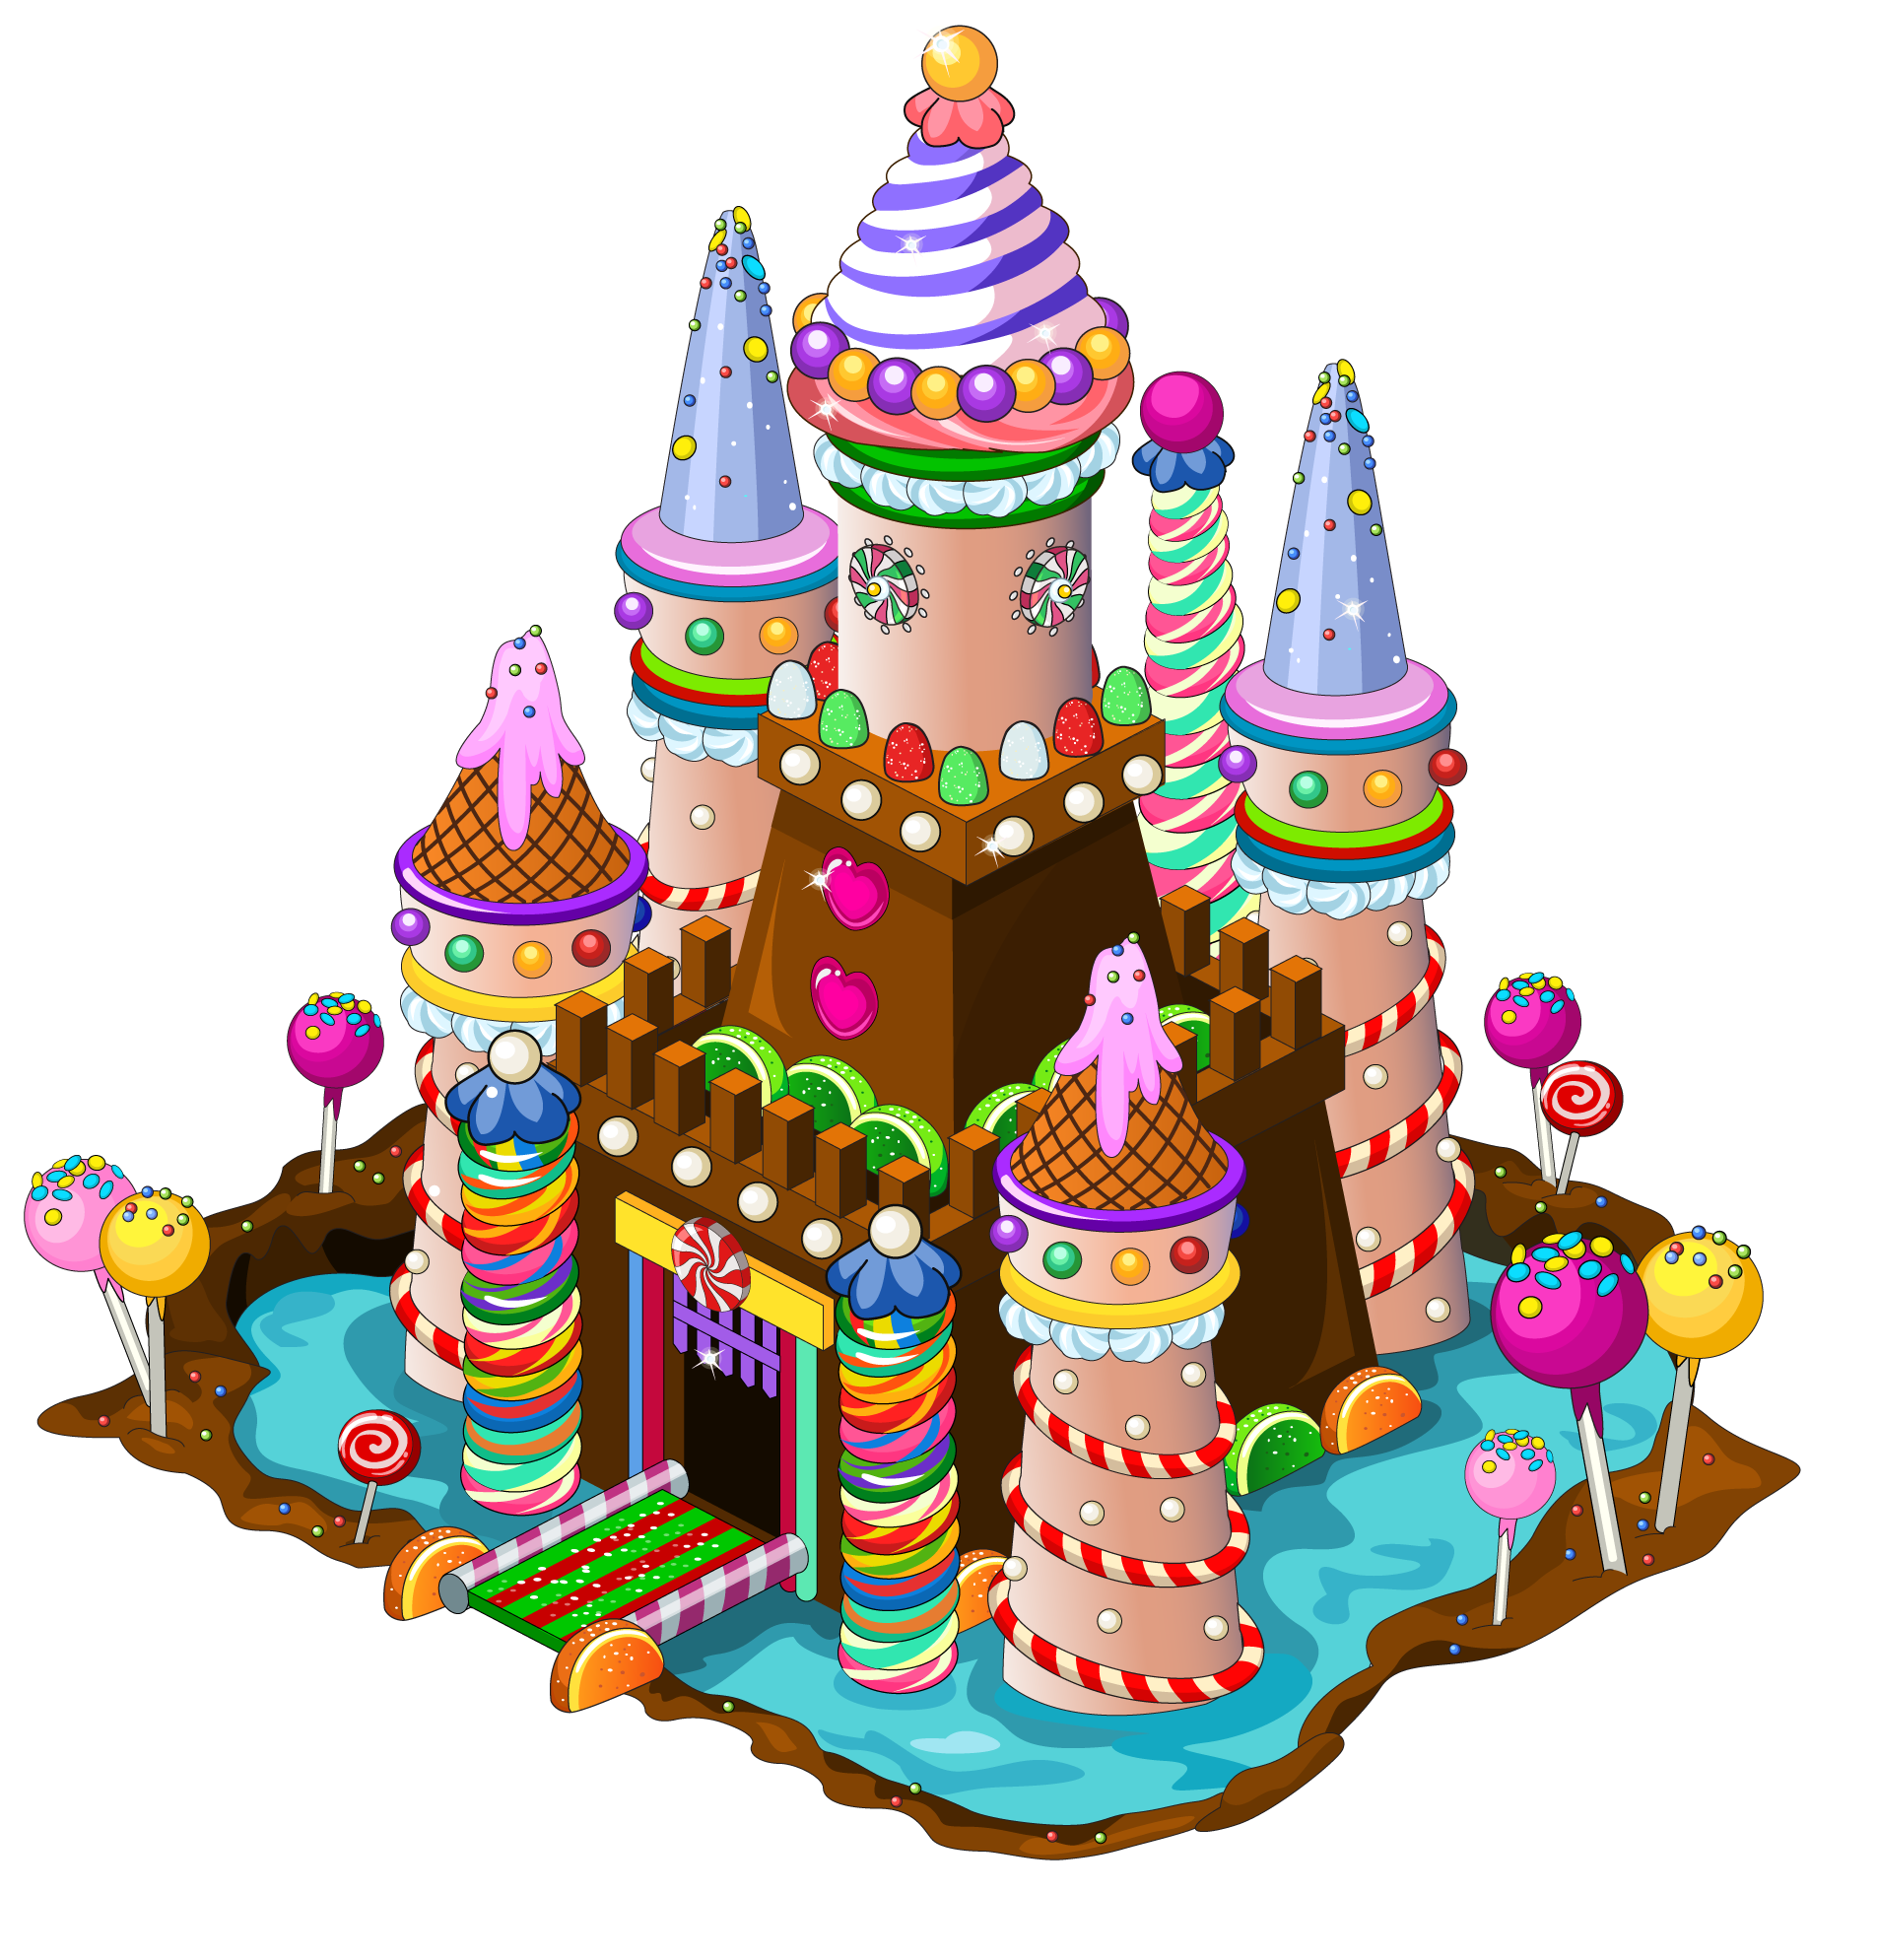 candyland-palace-family-guy-the-quest-for-stuff-wiki-fandom-powered-by-wikia